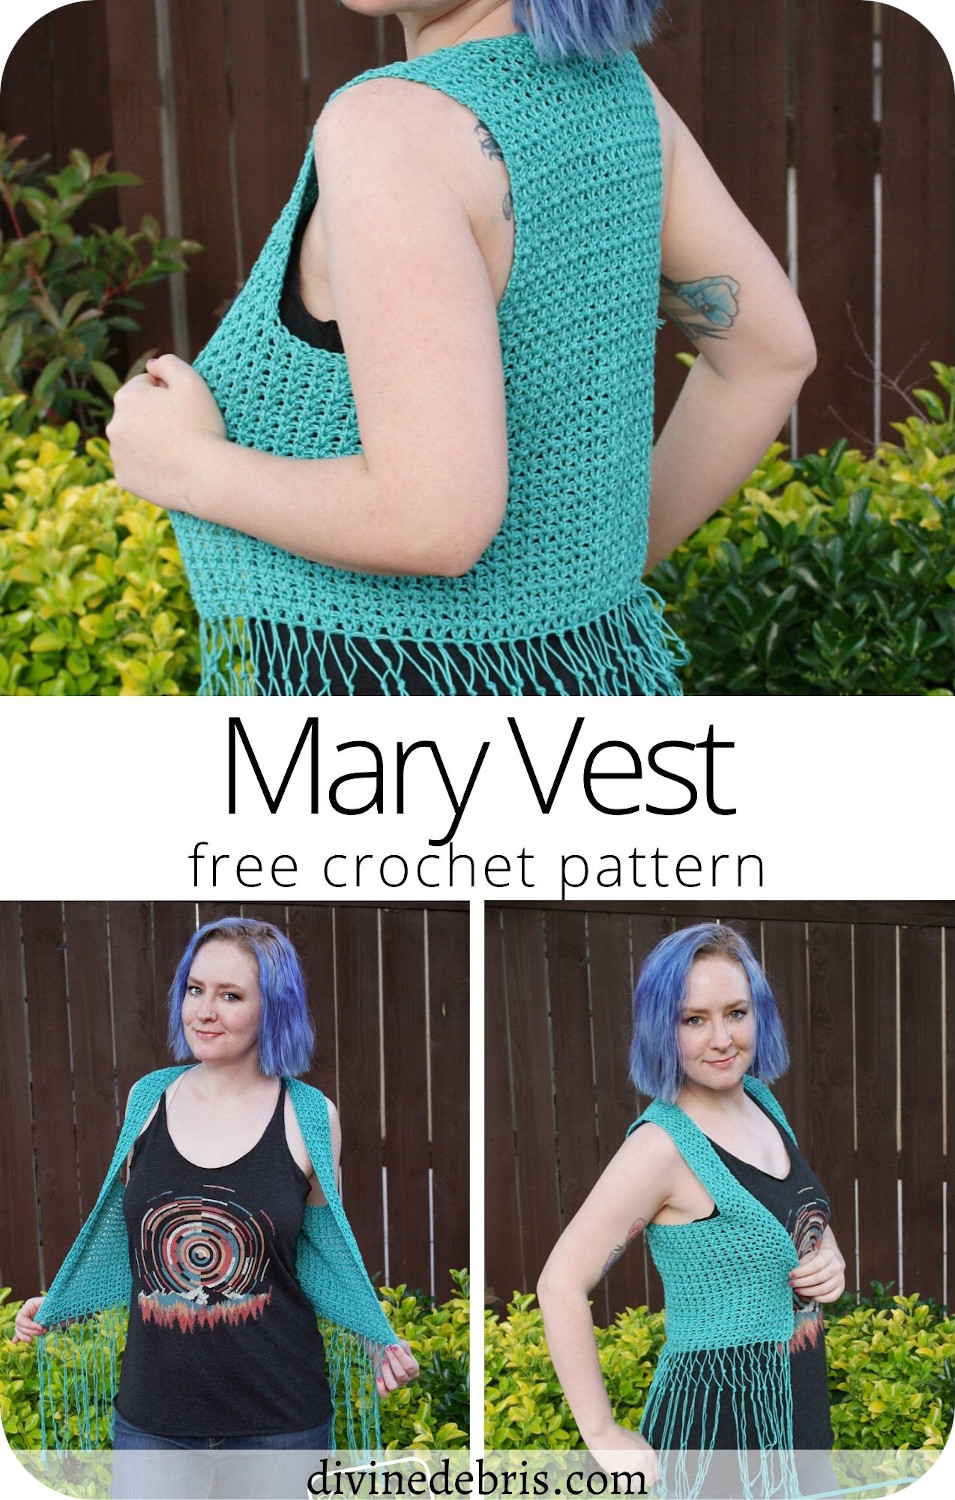 Looking for a fun vest to layer over tank tops for those warm summer months? Be fashionable with the Mary Vest from a free crochet pattern by Divine Debris